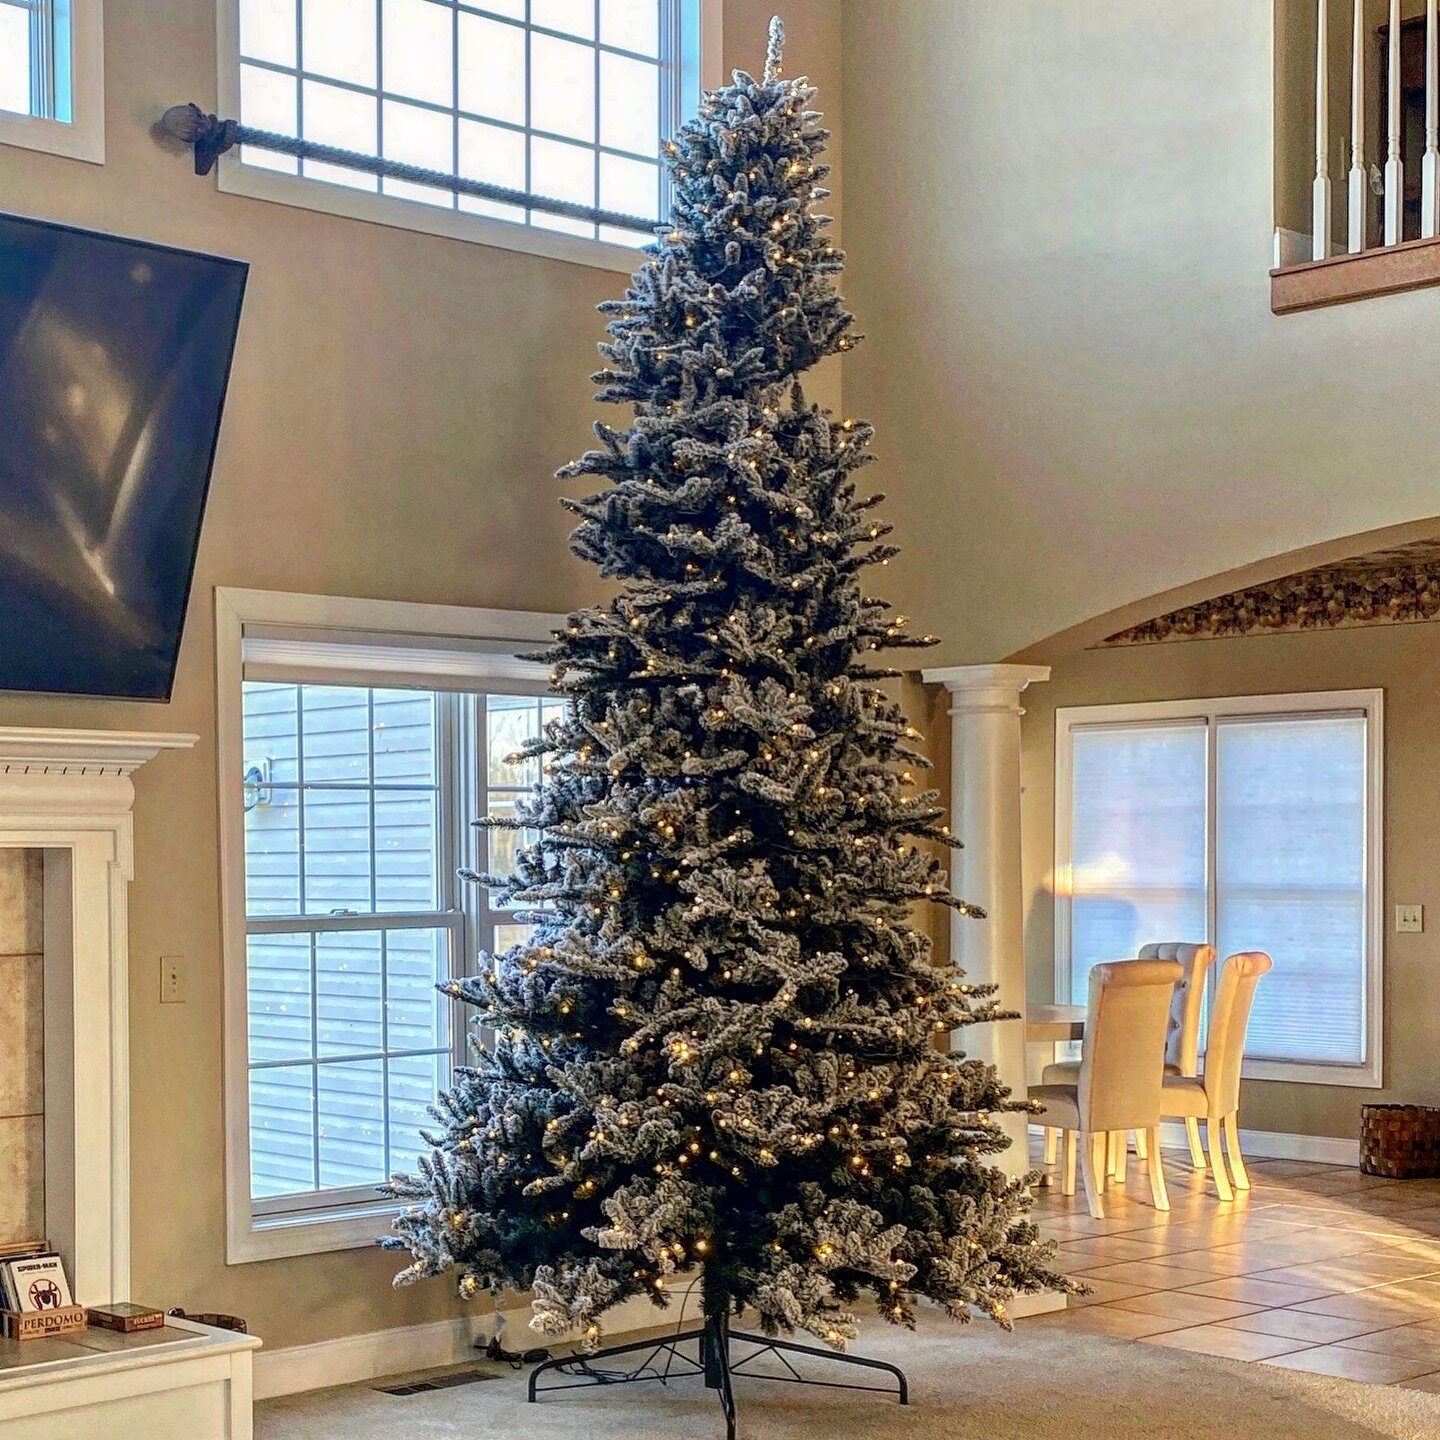 🎄 Christmas Magic Unfolding at The Mansion! 🏰✨

As the Christmas tree takes center stage, we're thrilled to announce that the holiday season is officially underway at The Mansion, Blue Heron Holler! 🎅🤶 Gather your loved ones for a festive retreat